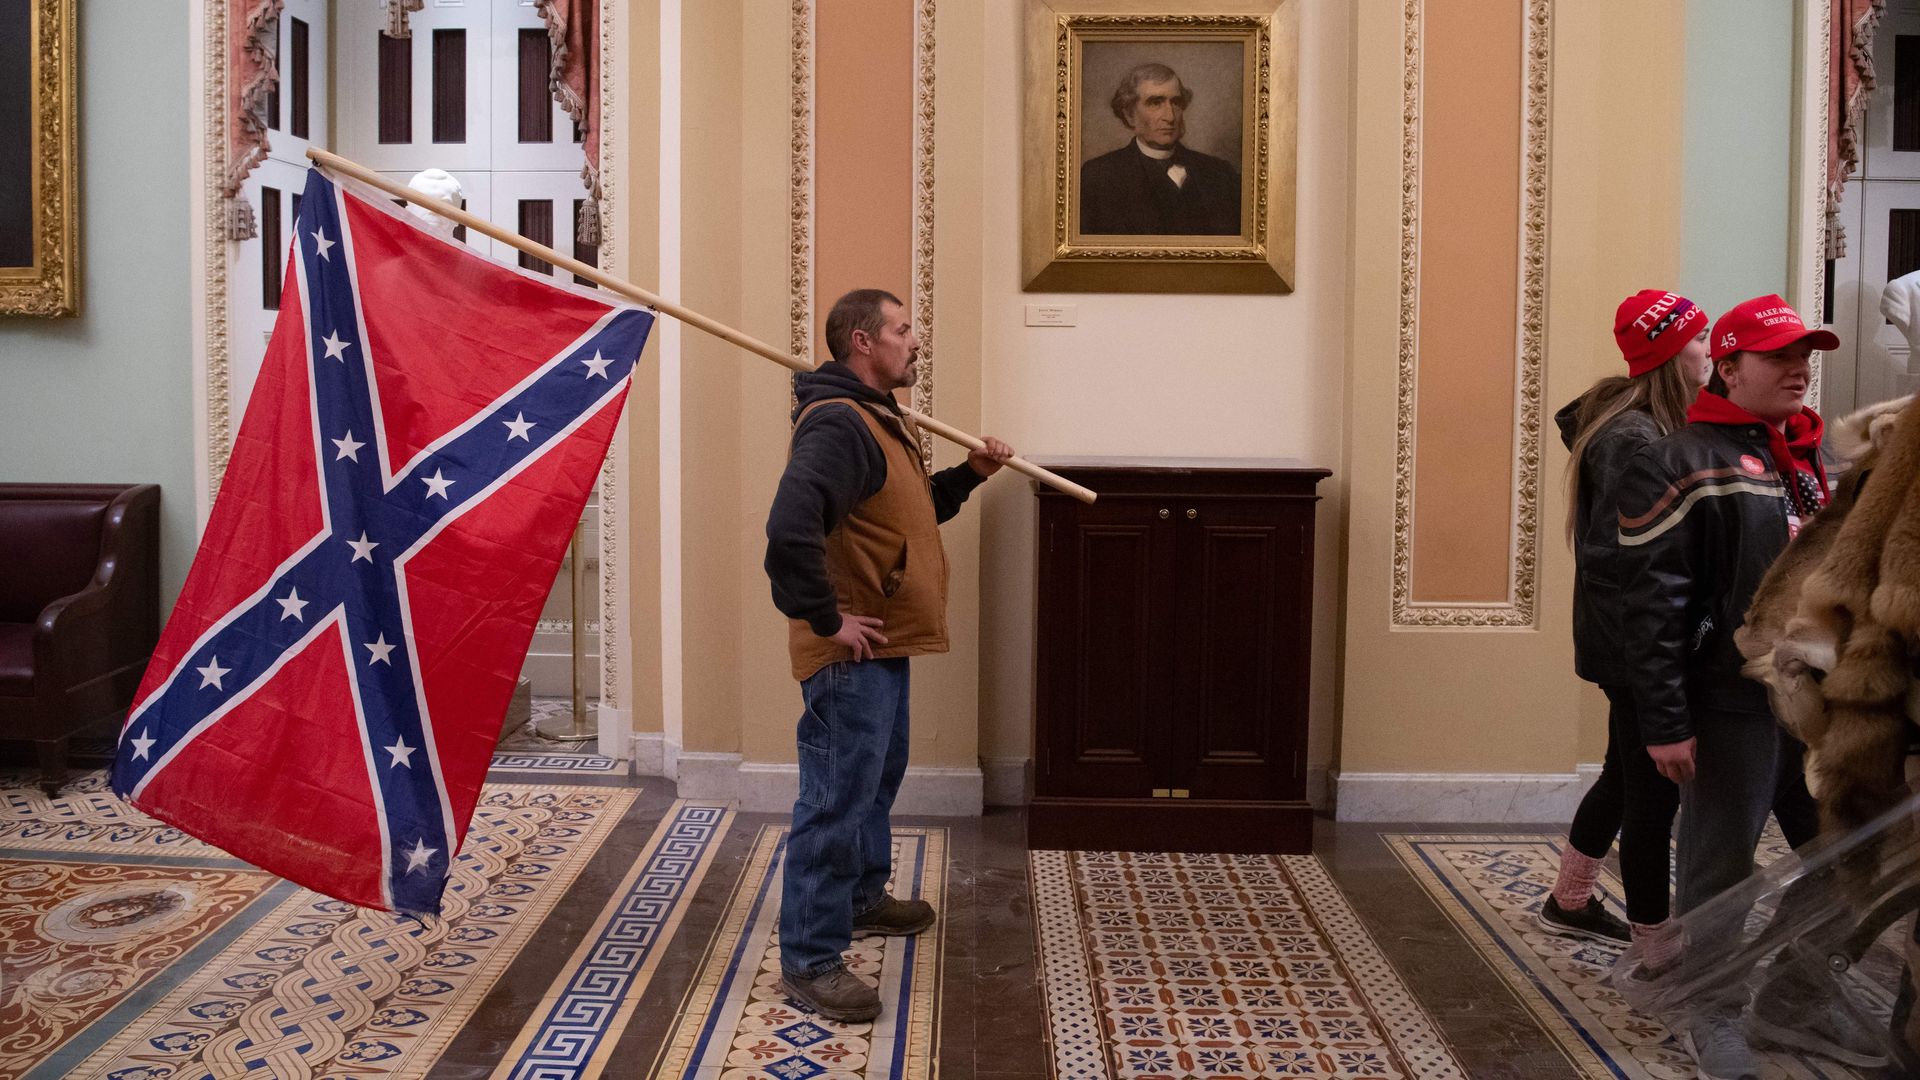 A man is seen carrying a Confederate flag inside the Capitol on Jan. 6.